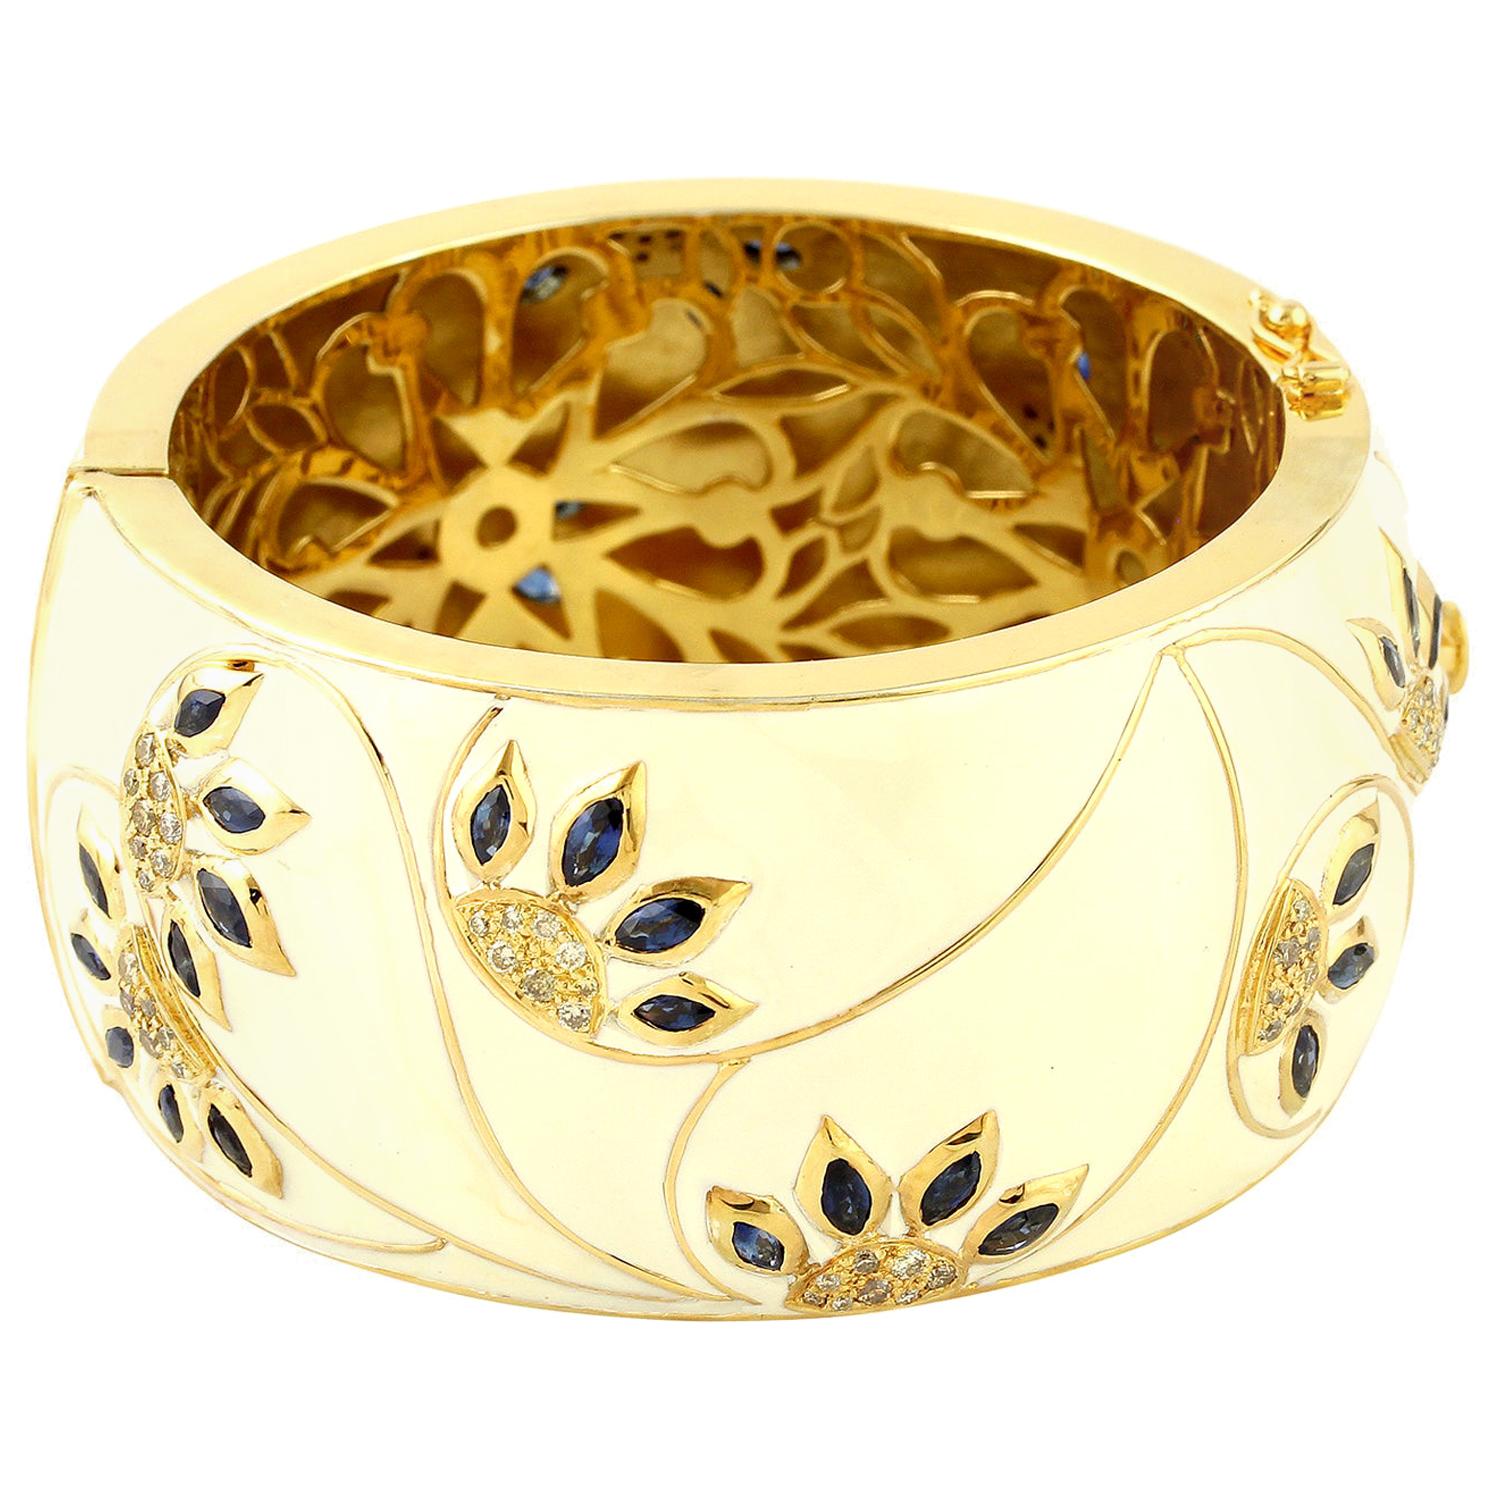 Cream Enamel Cuff Bangle with Diamond and Sapphire in 18 Karat Gold and Silver